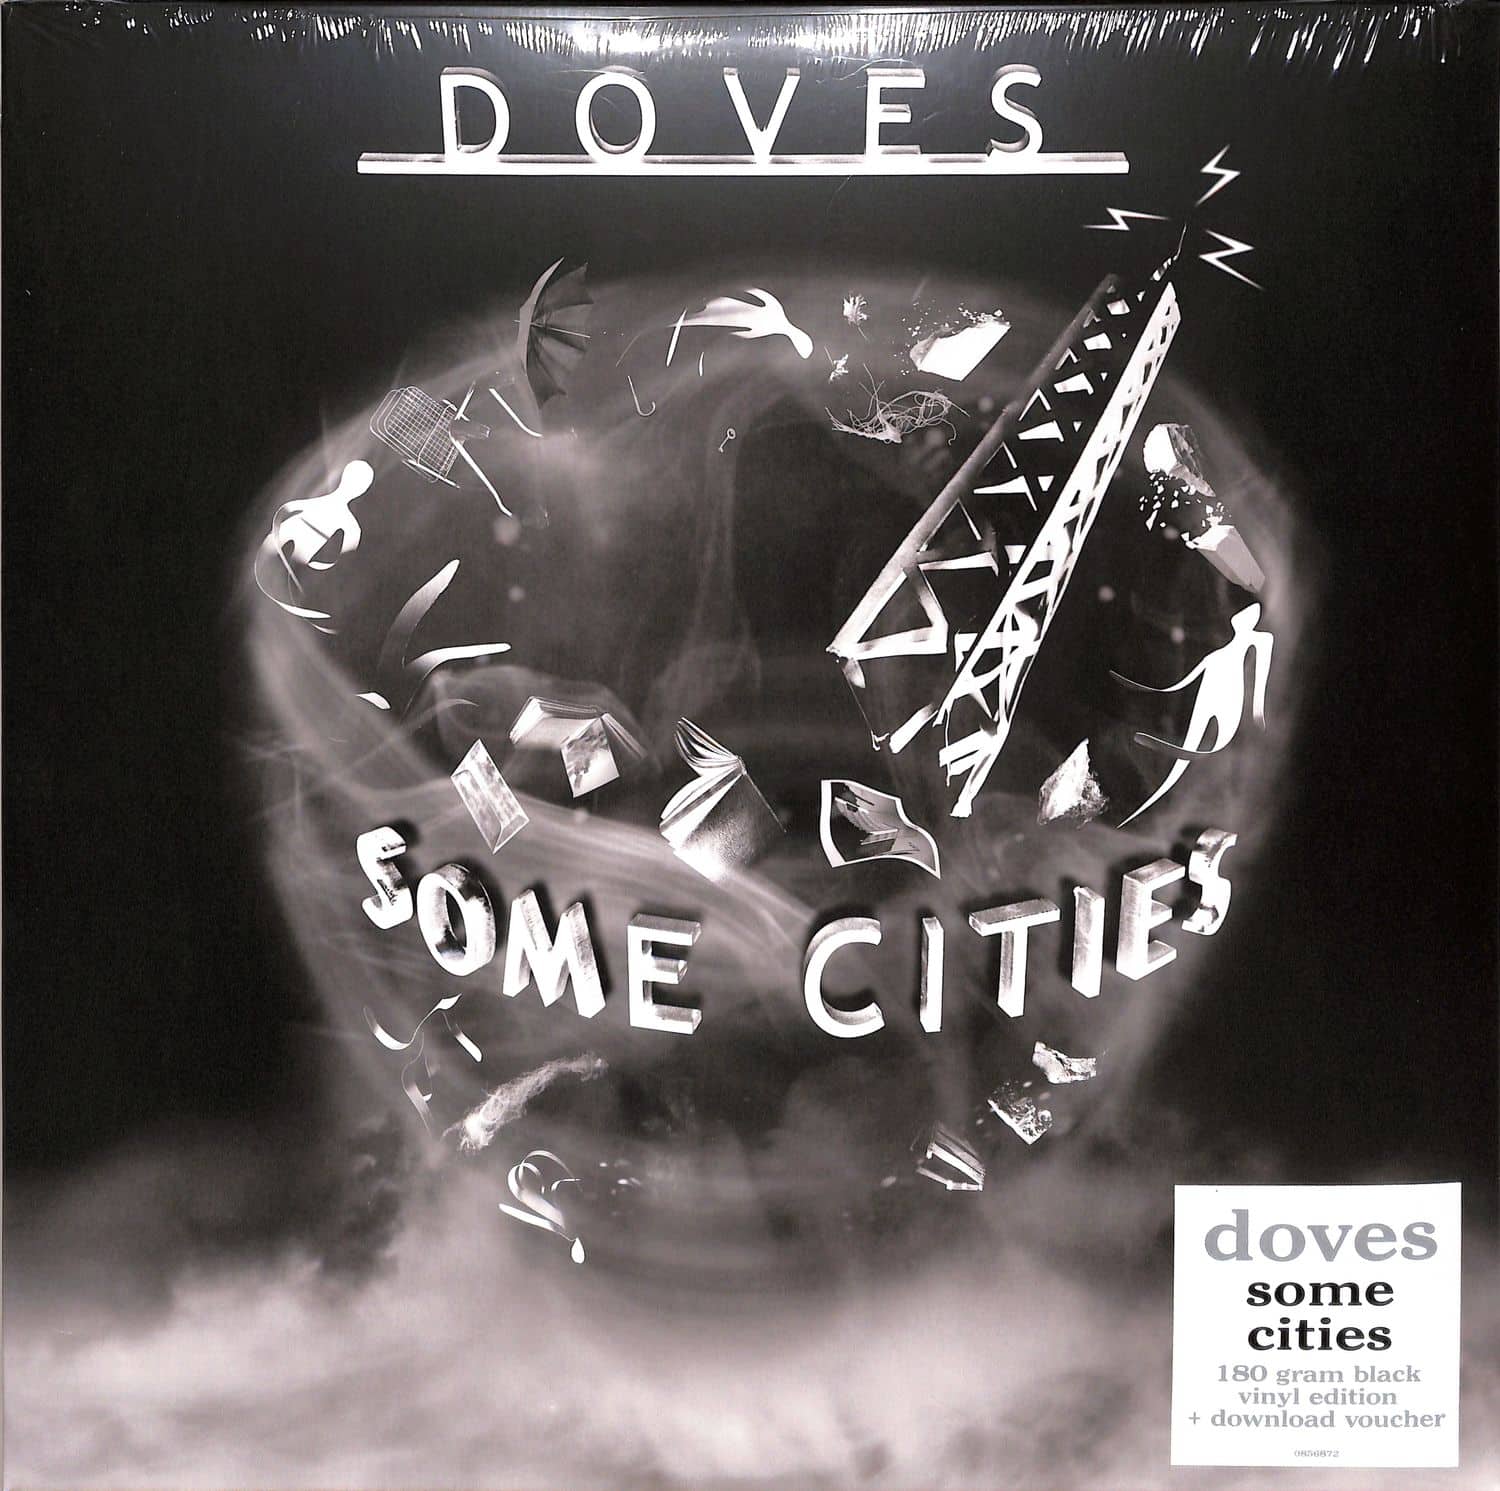 Doves - SOME CITIES 